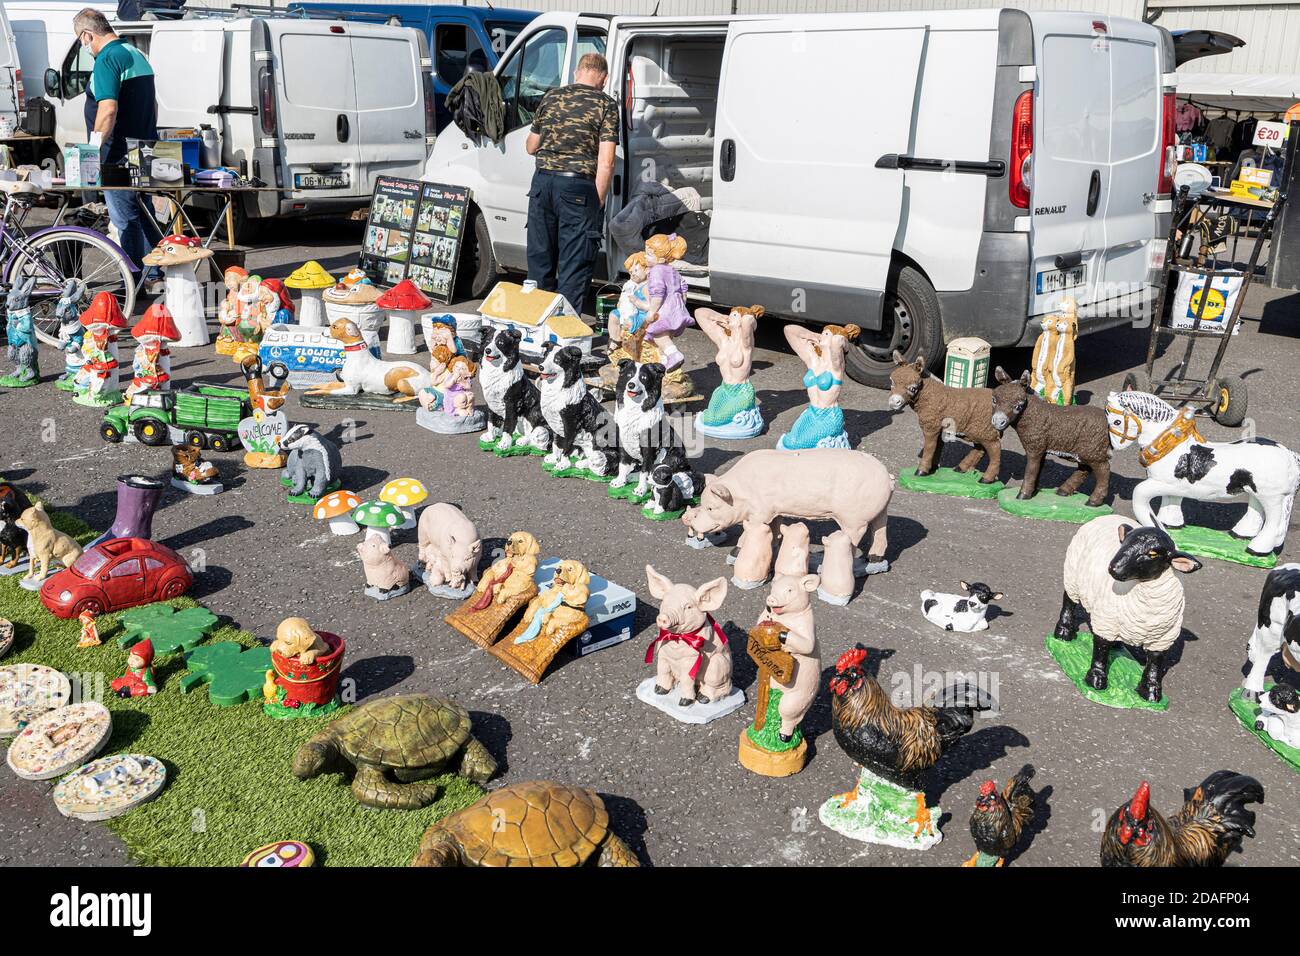 Plaster cast animals, garden decorations at Car boot sale, bric a brac, for sale at a weekly market at Castleinch, County Kilkenny, Ireland Stock Photo